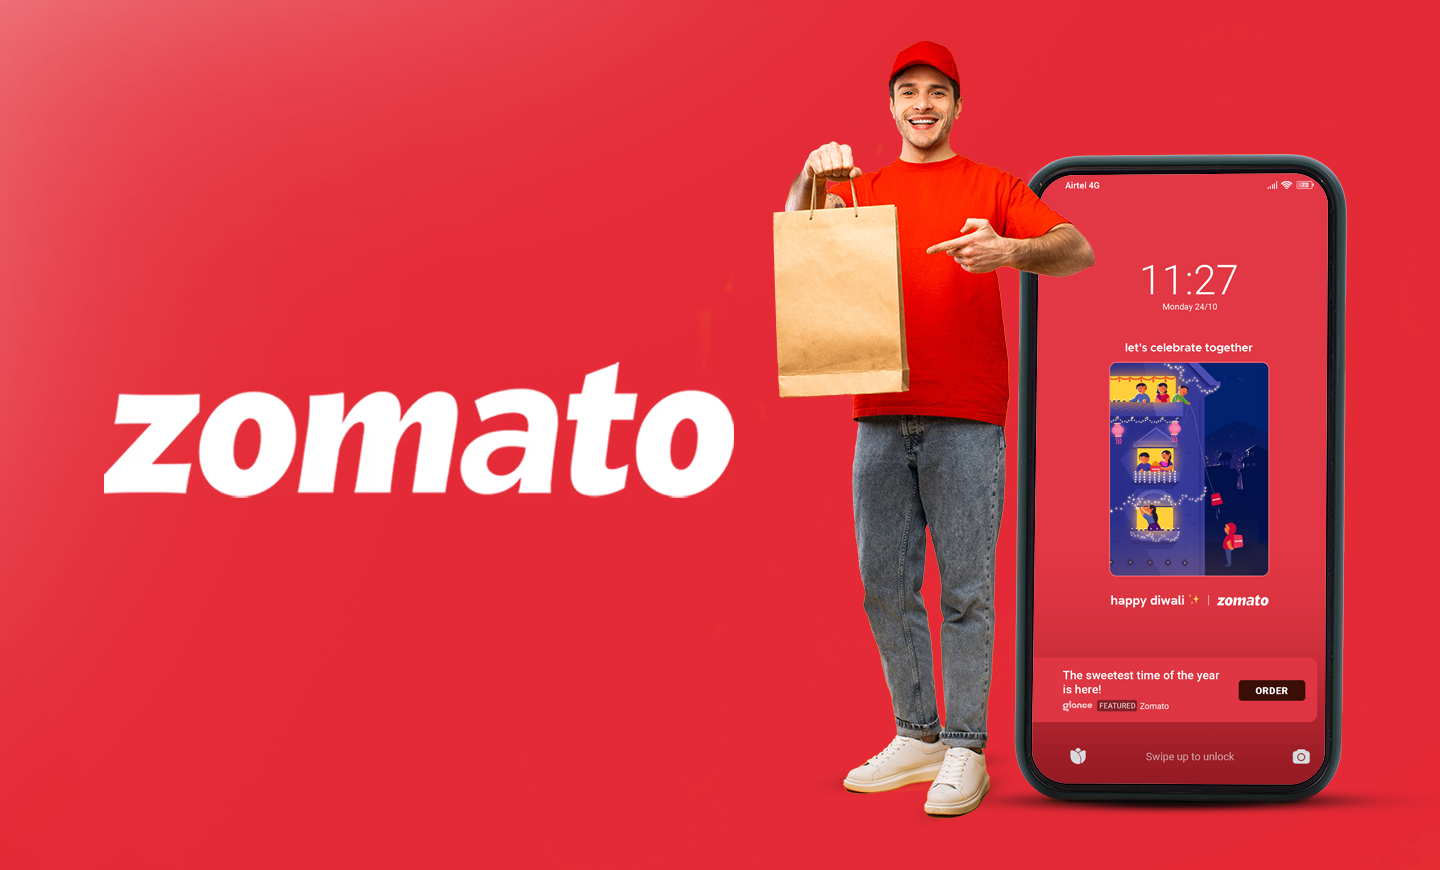 Zomato Wins Over Hearts and Fulfills Carts of Millions of Customers Through Glance